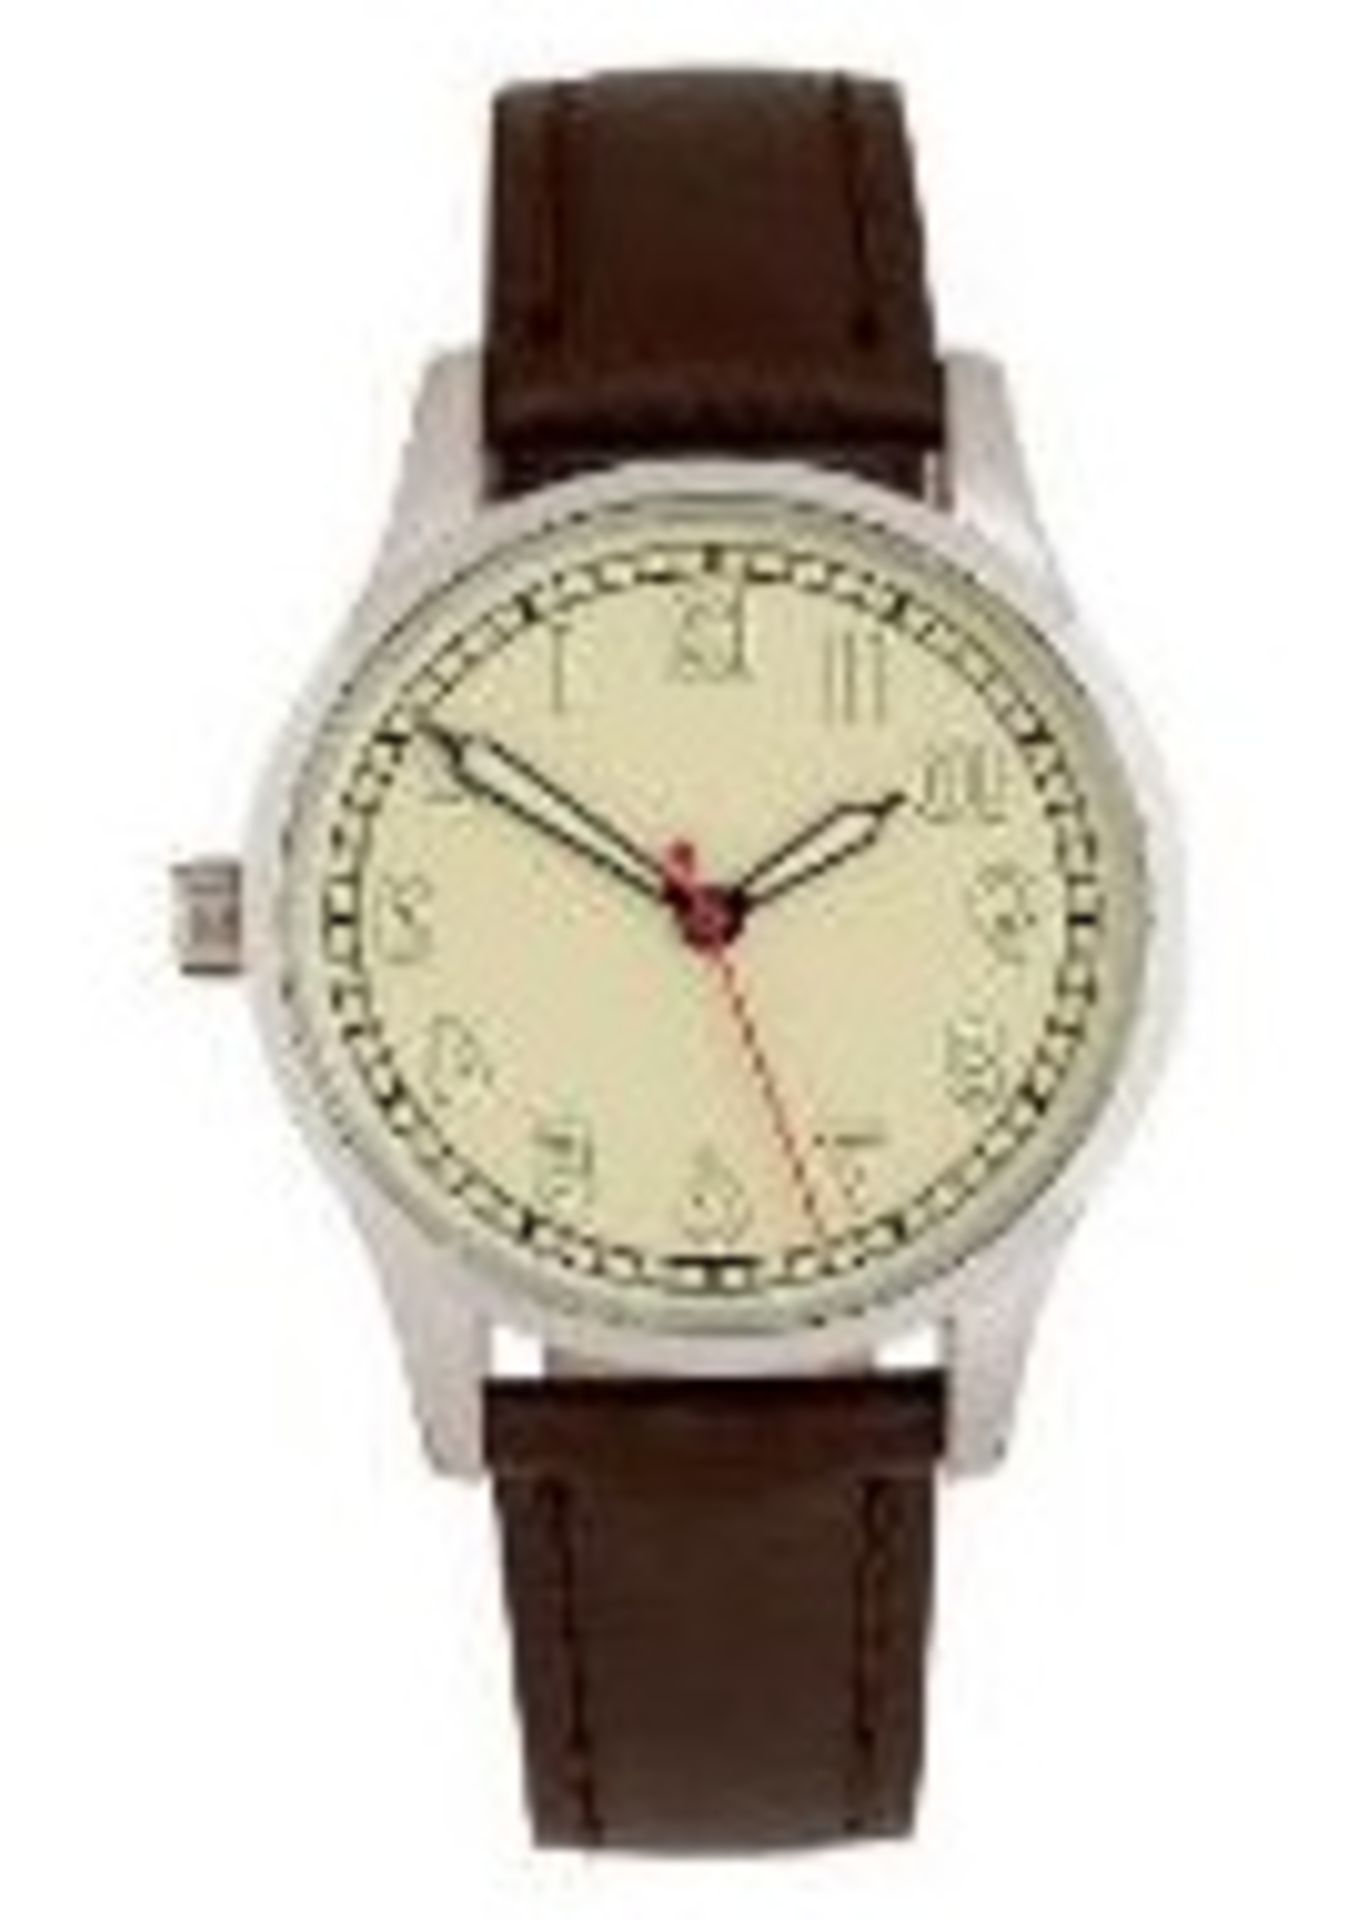 + VAT Brand New Gents 1950s Russian Airmans Watch with Engraved Back in Presentation Box